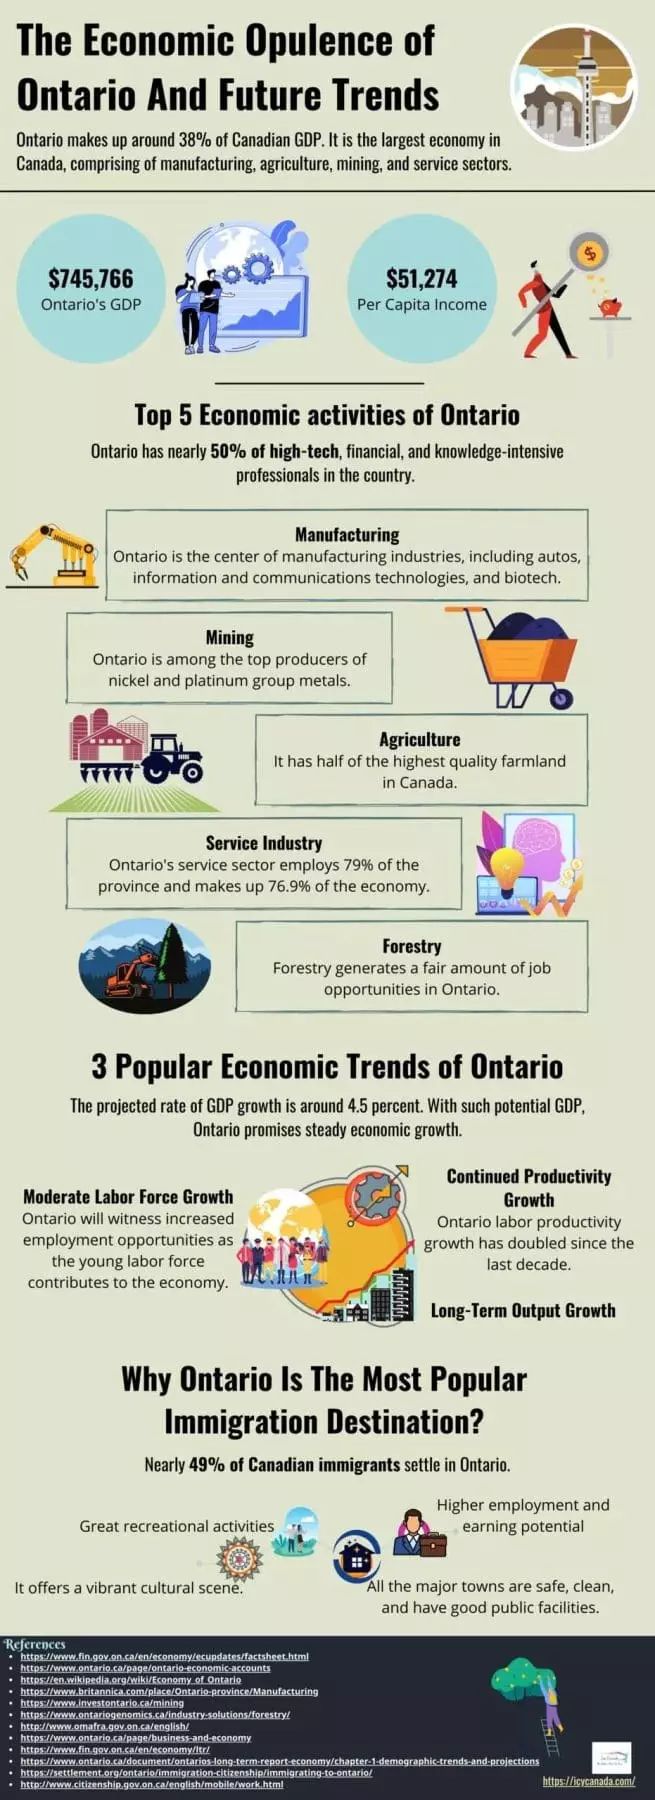 The Economic Opulence of Ontario And Future Trends